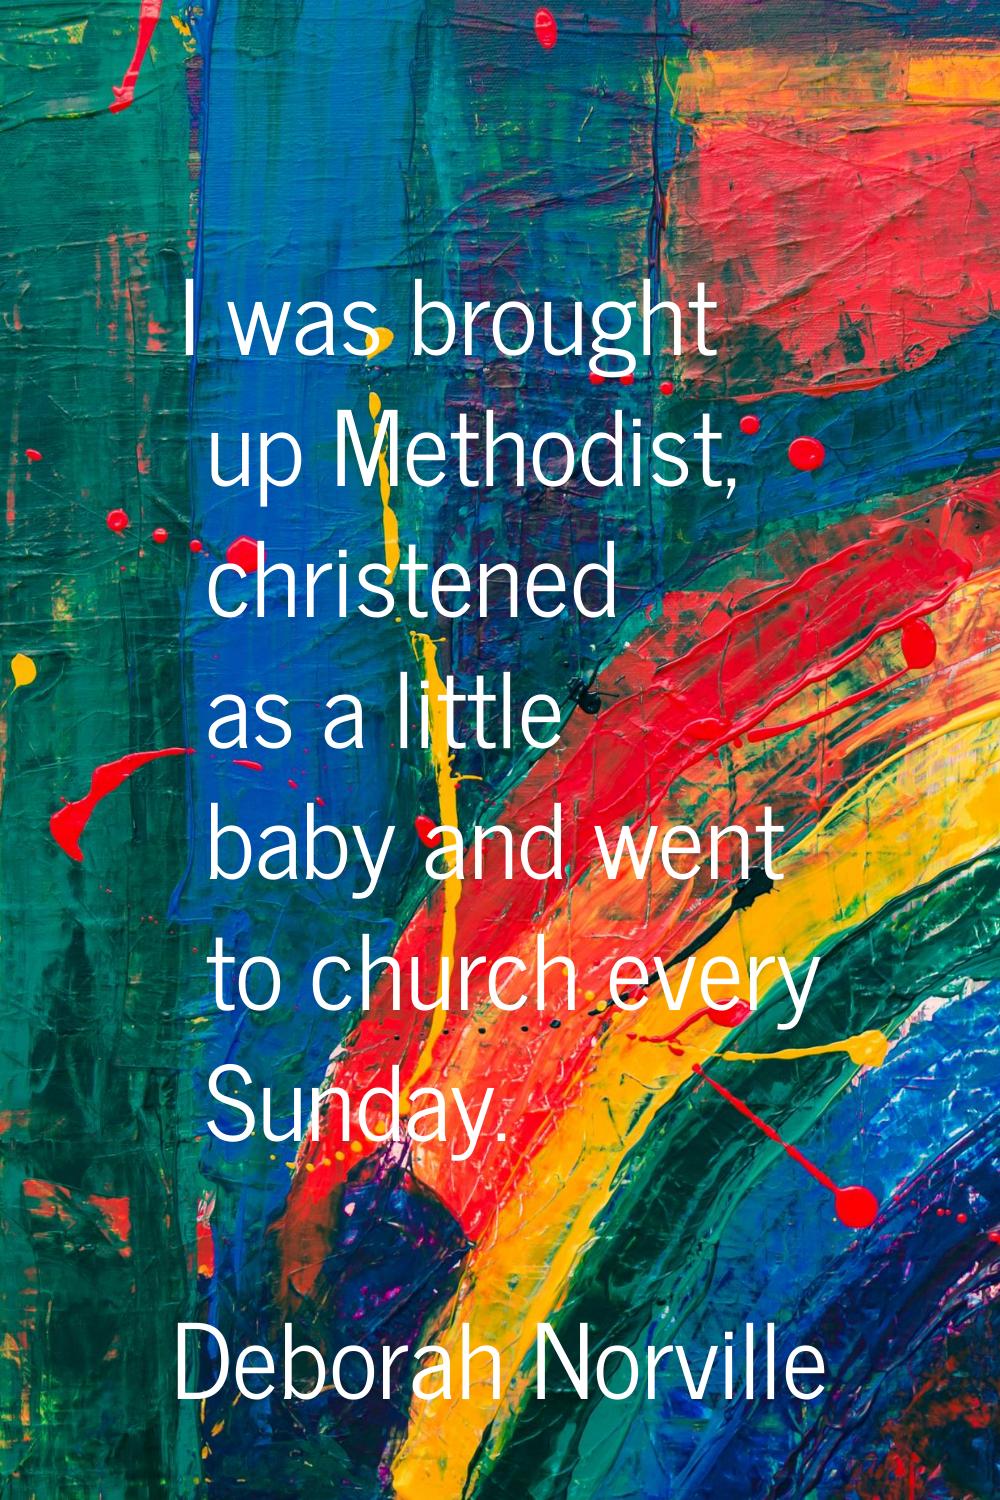 I was brought up Methodist, christened as a little baby and went to church every Sunday.